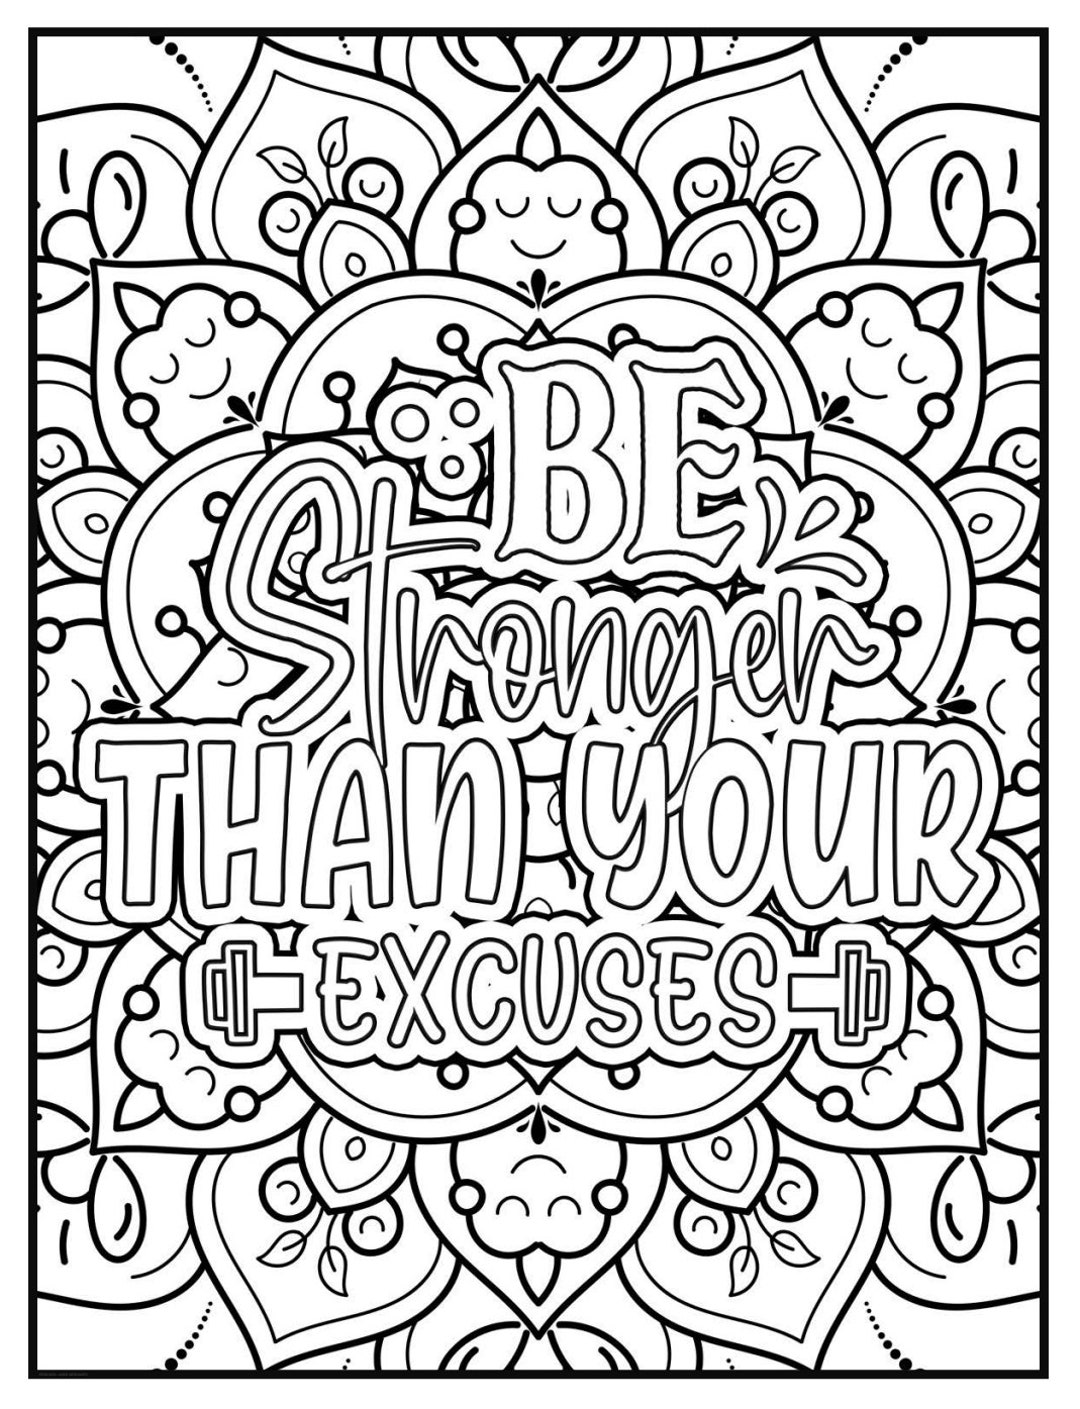 50 Motivational Coloring Pages Volume 1 -  Canada